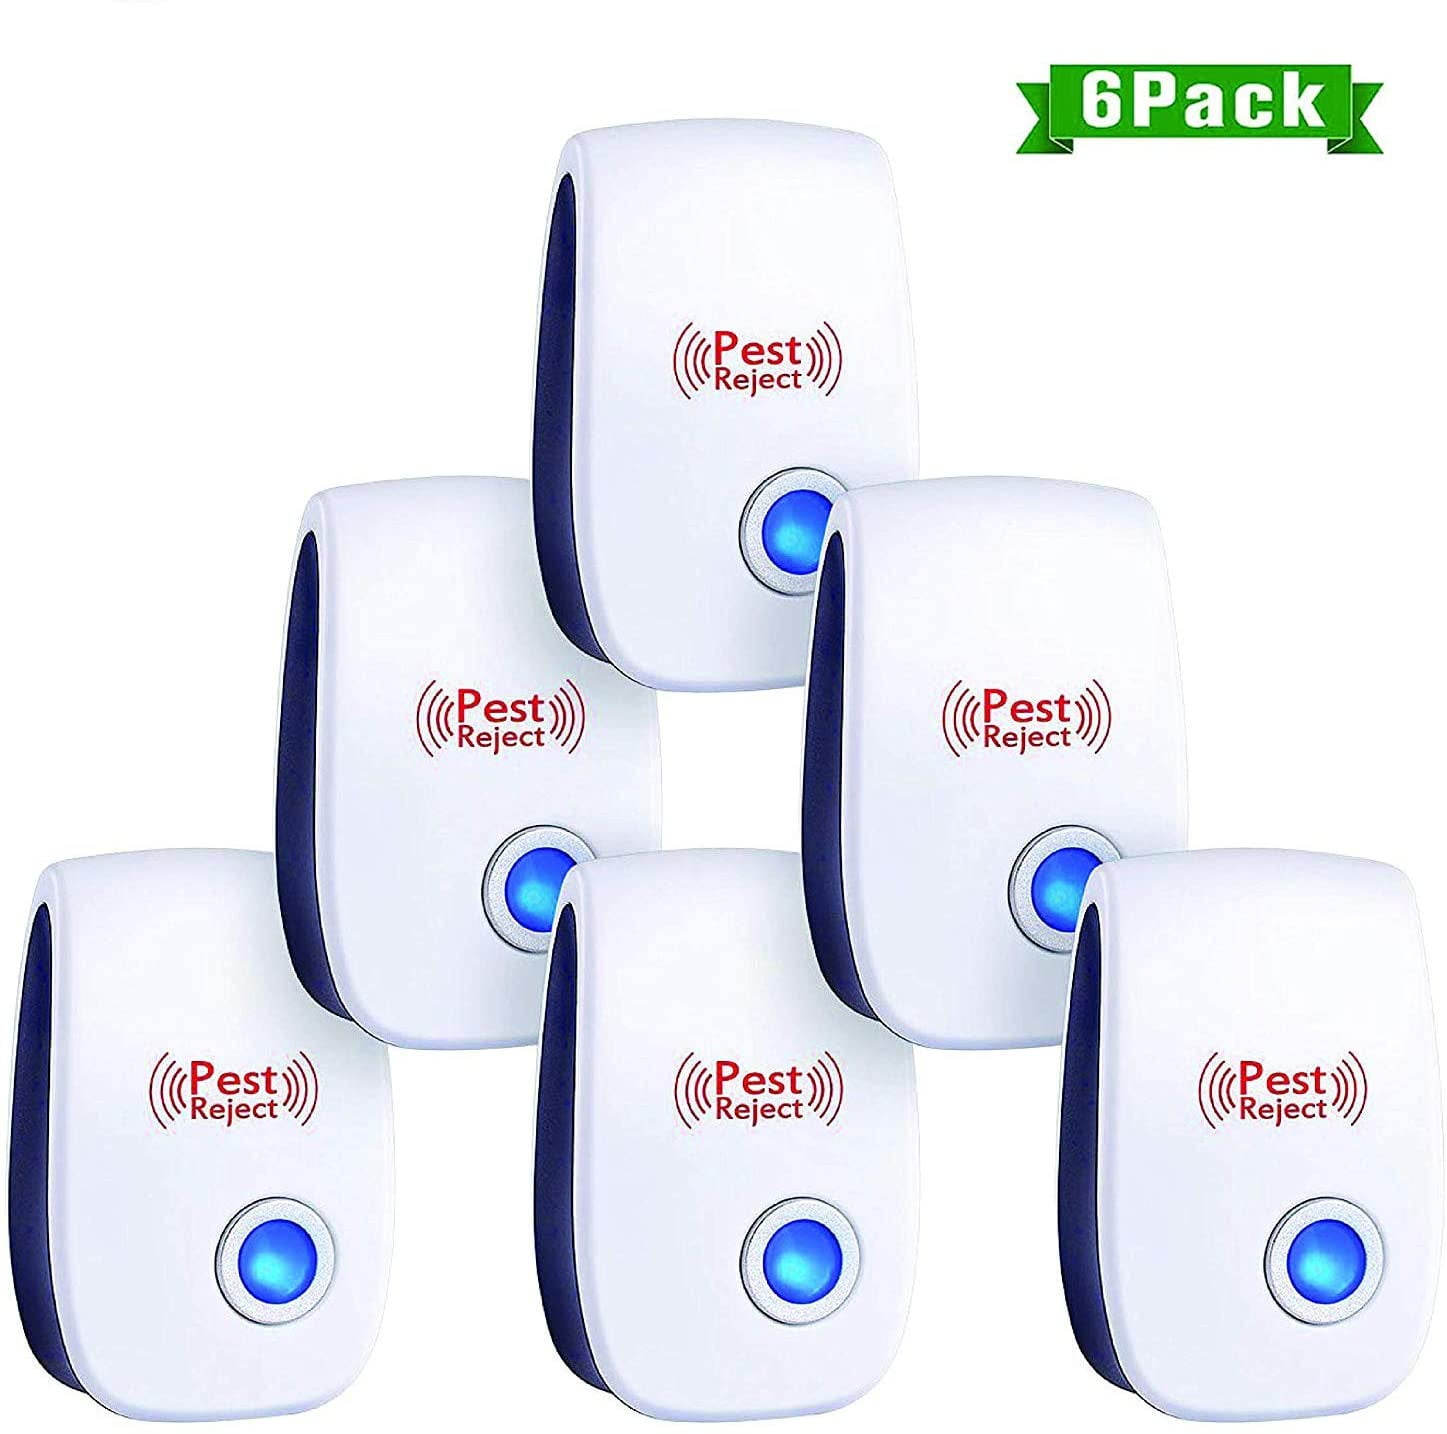 Professional Home 6 Pack Ultrasonic Pest Repellent Plug Control By Gradi